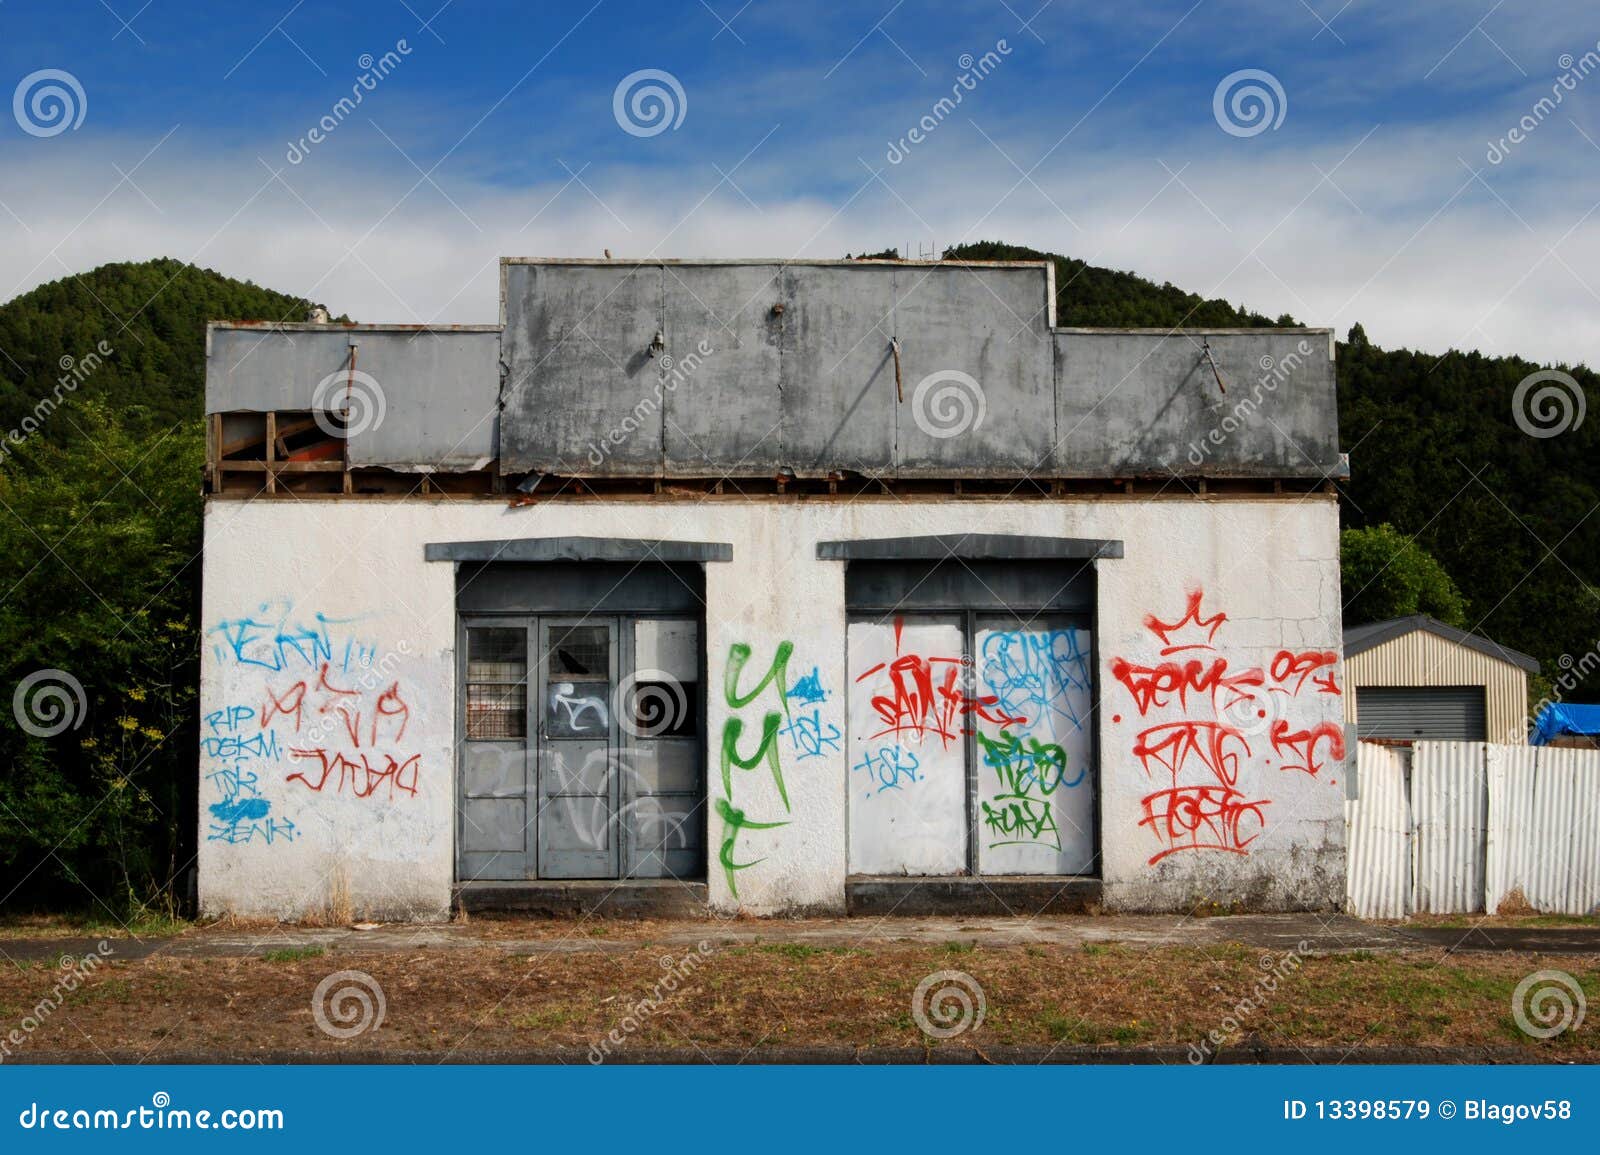 abandoned tagged building